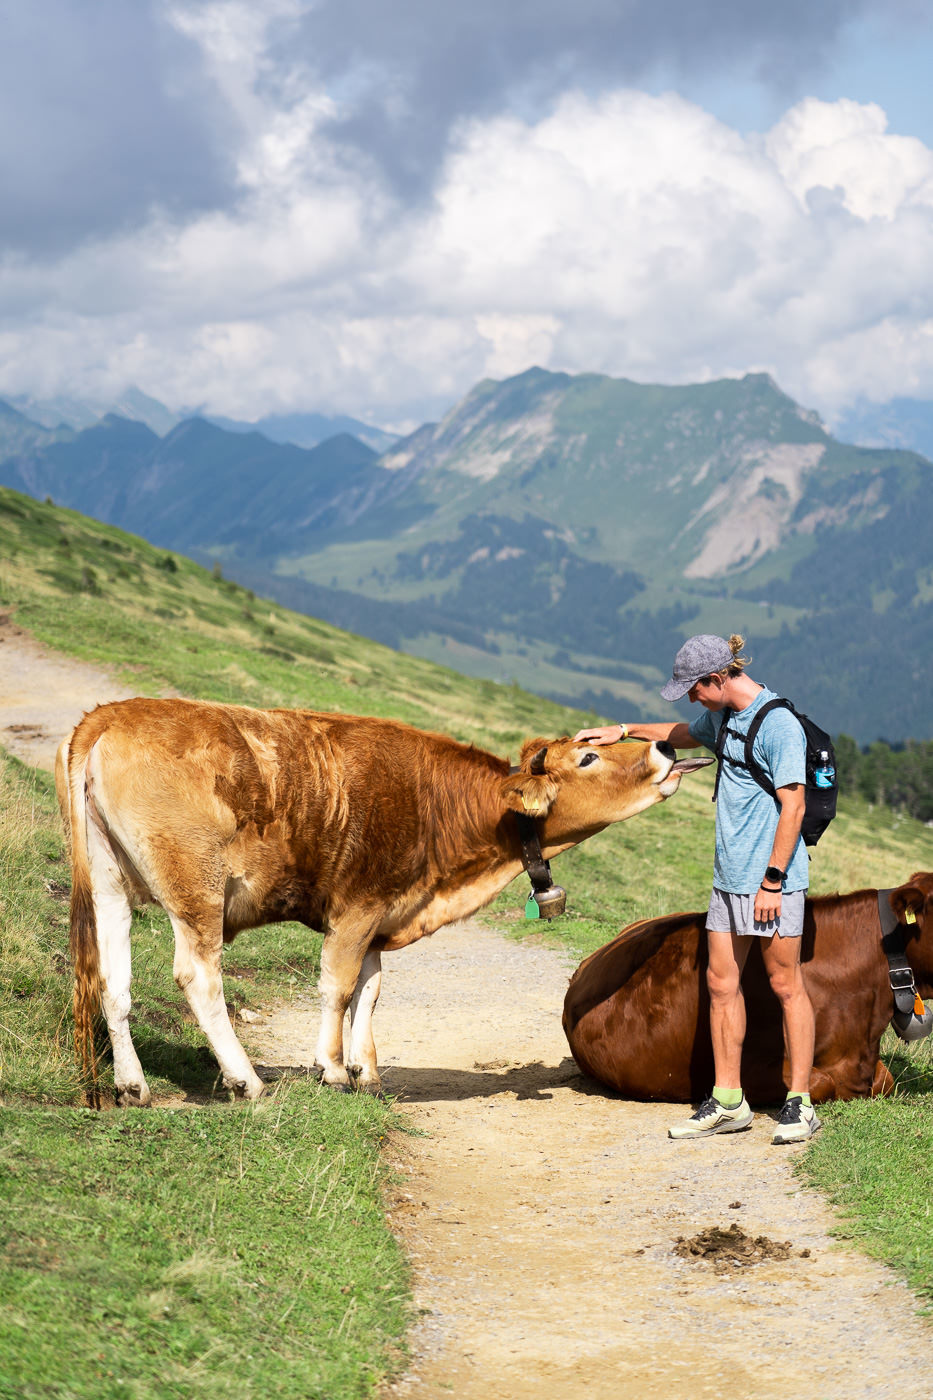 a man standing next to a brown cow on a dirt road.